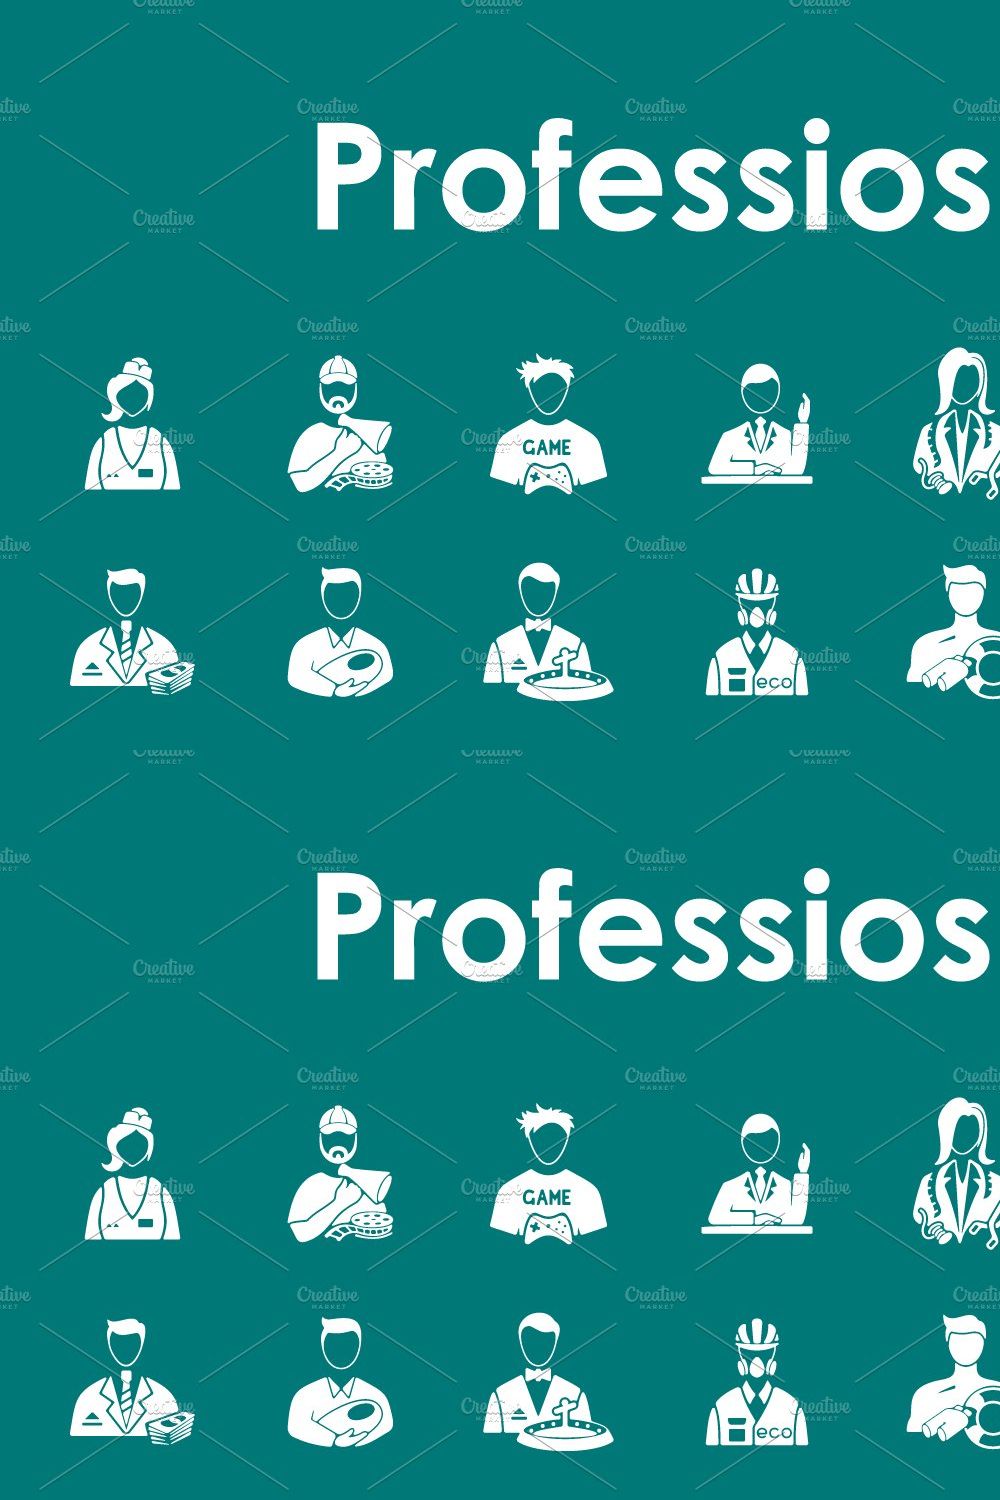 30 PROFESSIONS simple icons pinterest preview image.